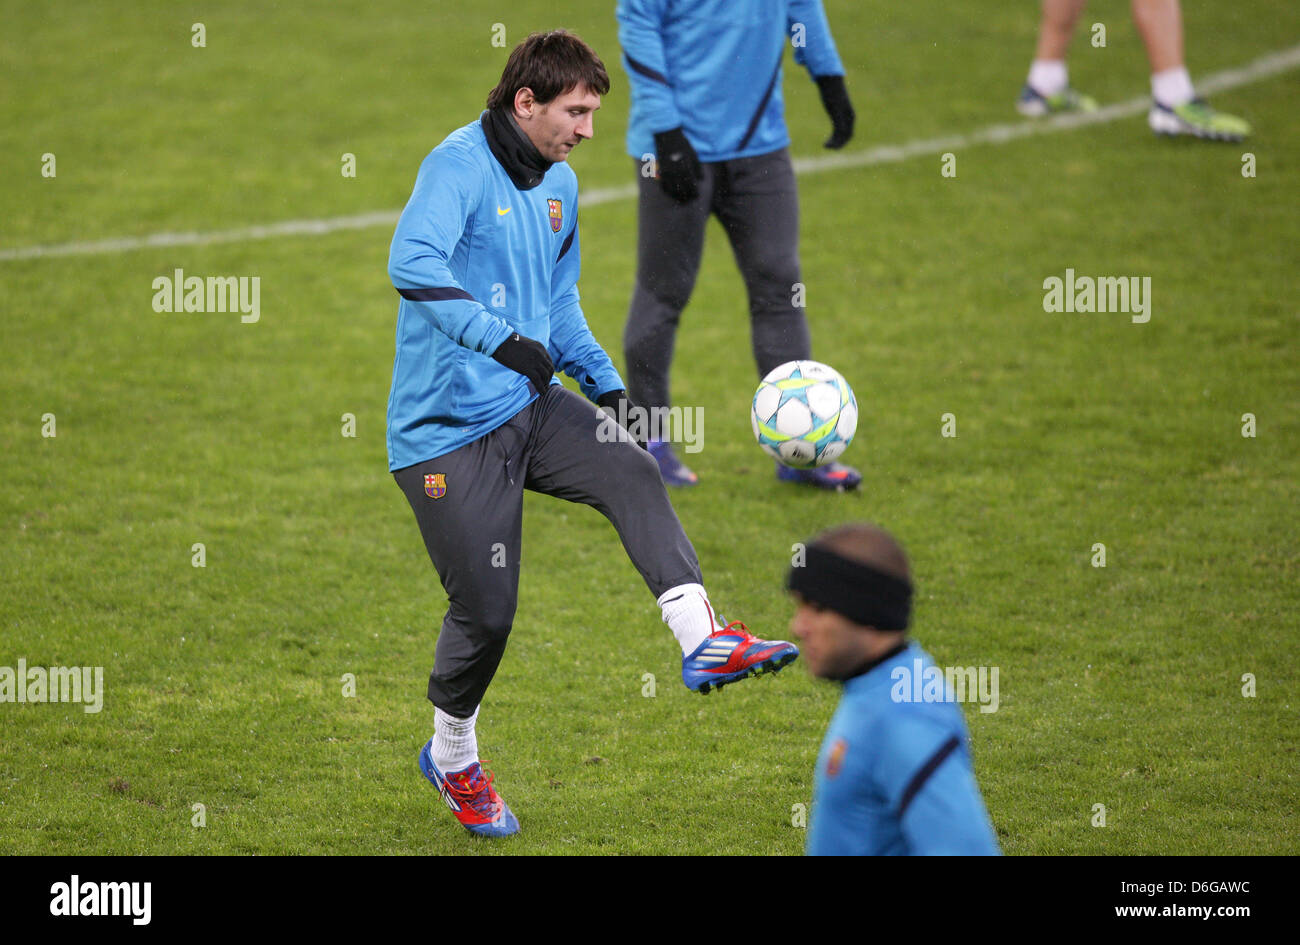 Barcelona's Lionel Messi (C) participates in a practice session at BayArena in Leverkusen, Germany, 13 February 2012. On 14 February 2012, Barcelona will play Leverkusen in the UEFA Champions League last 16 round. Photo: Rolf Vennenbernd Stock Photo